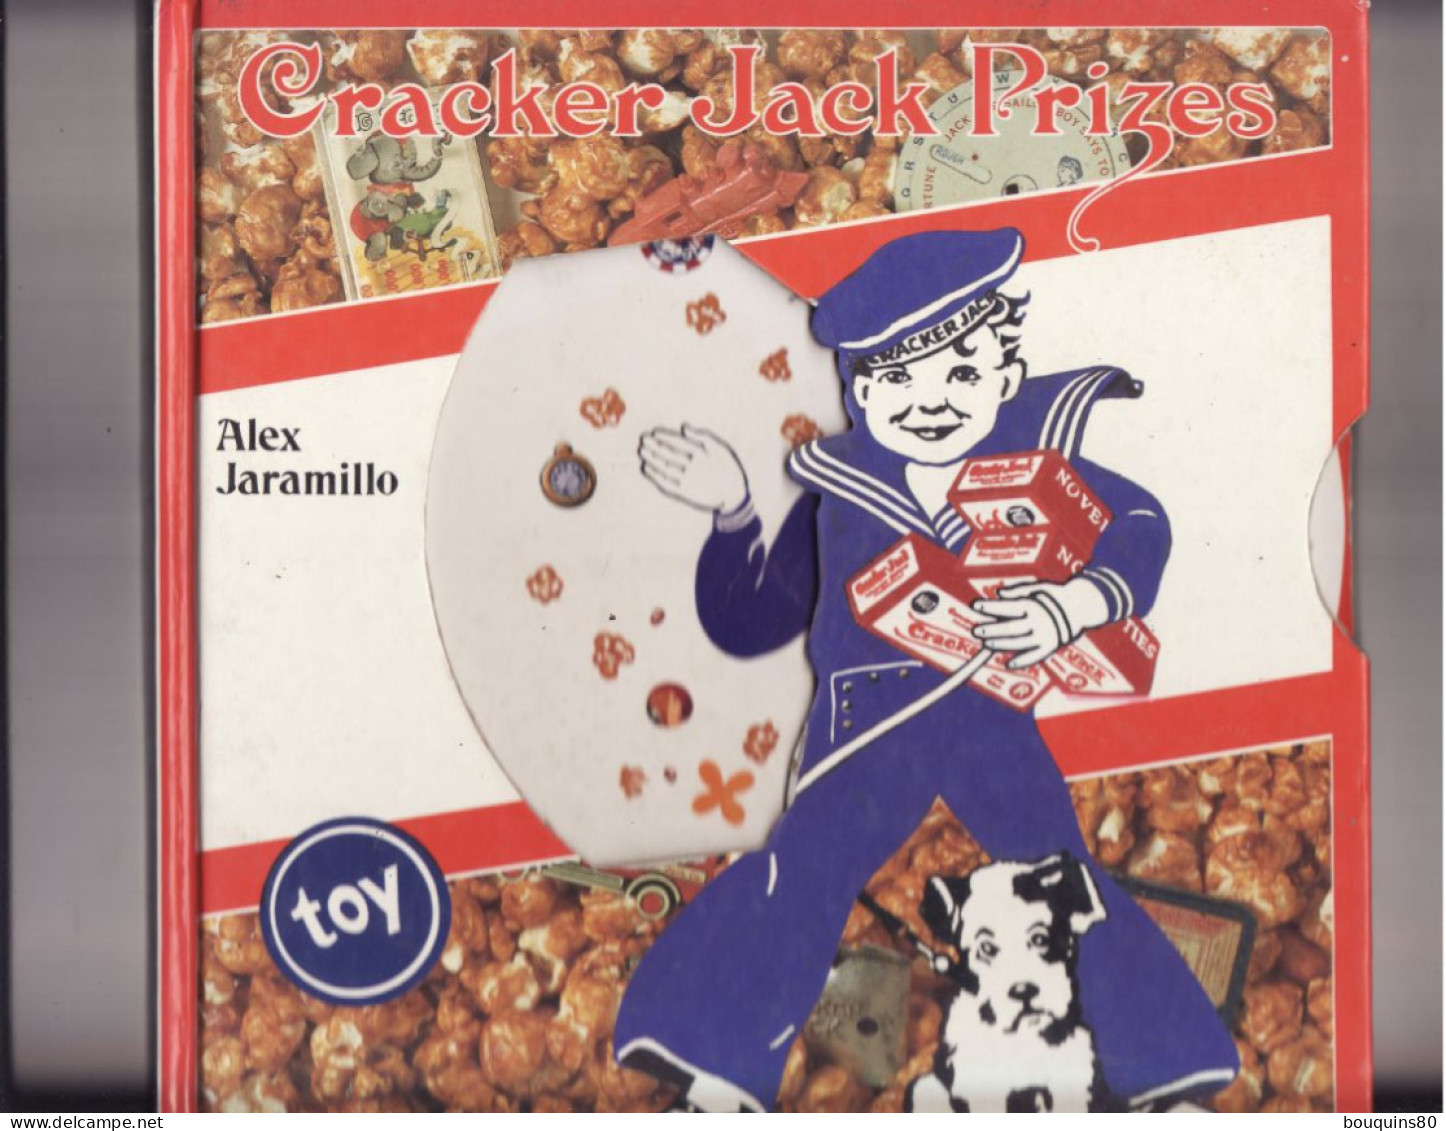 CRACKERS JACK PRIZES Collection Figurines De ALEX JARAMILLO 1989 - Books On Collecting